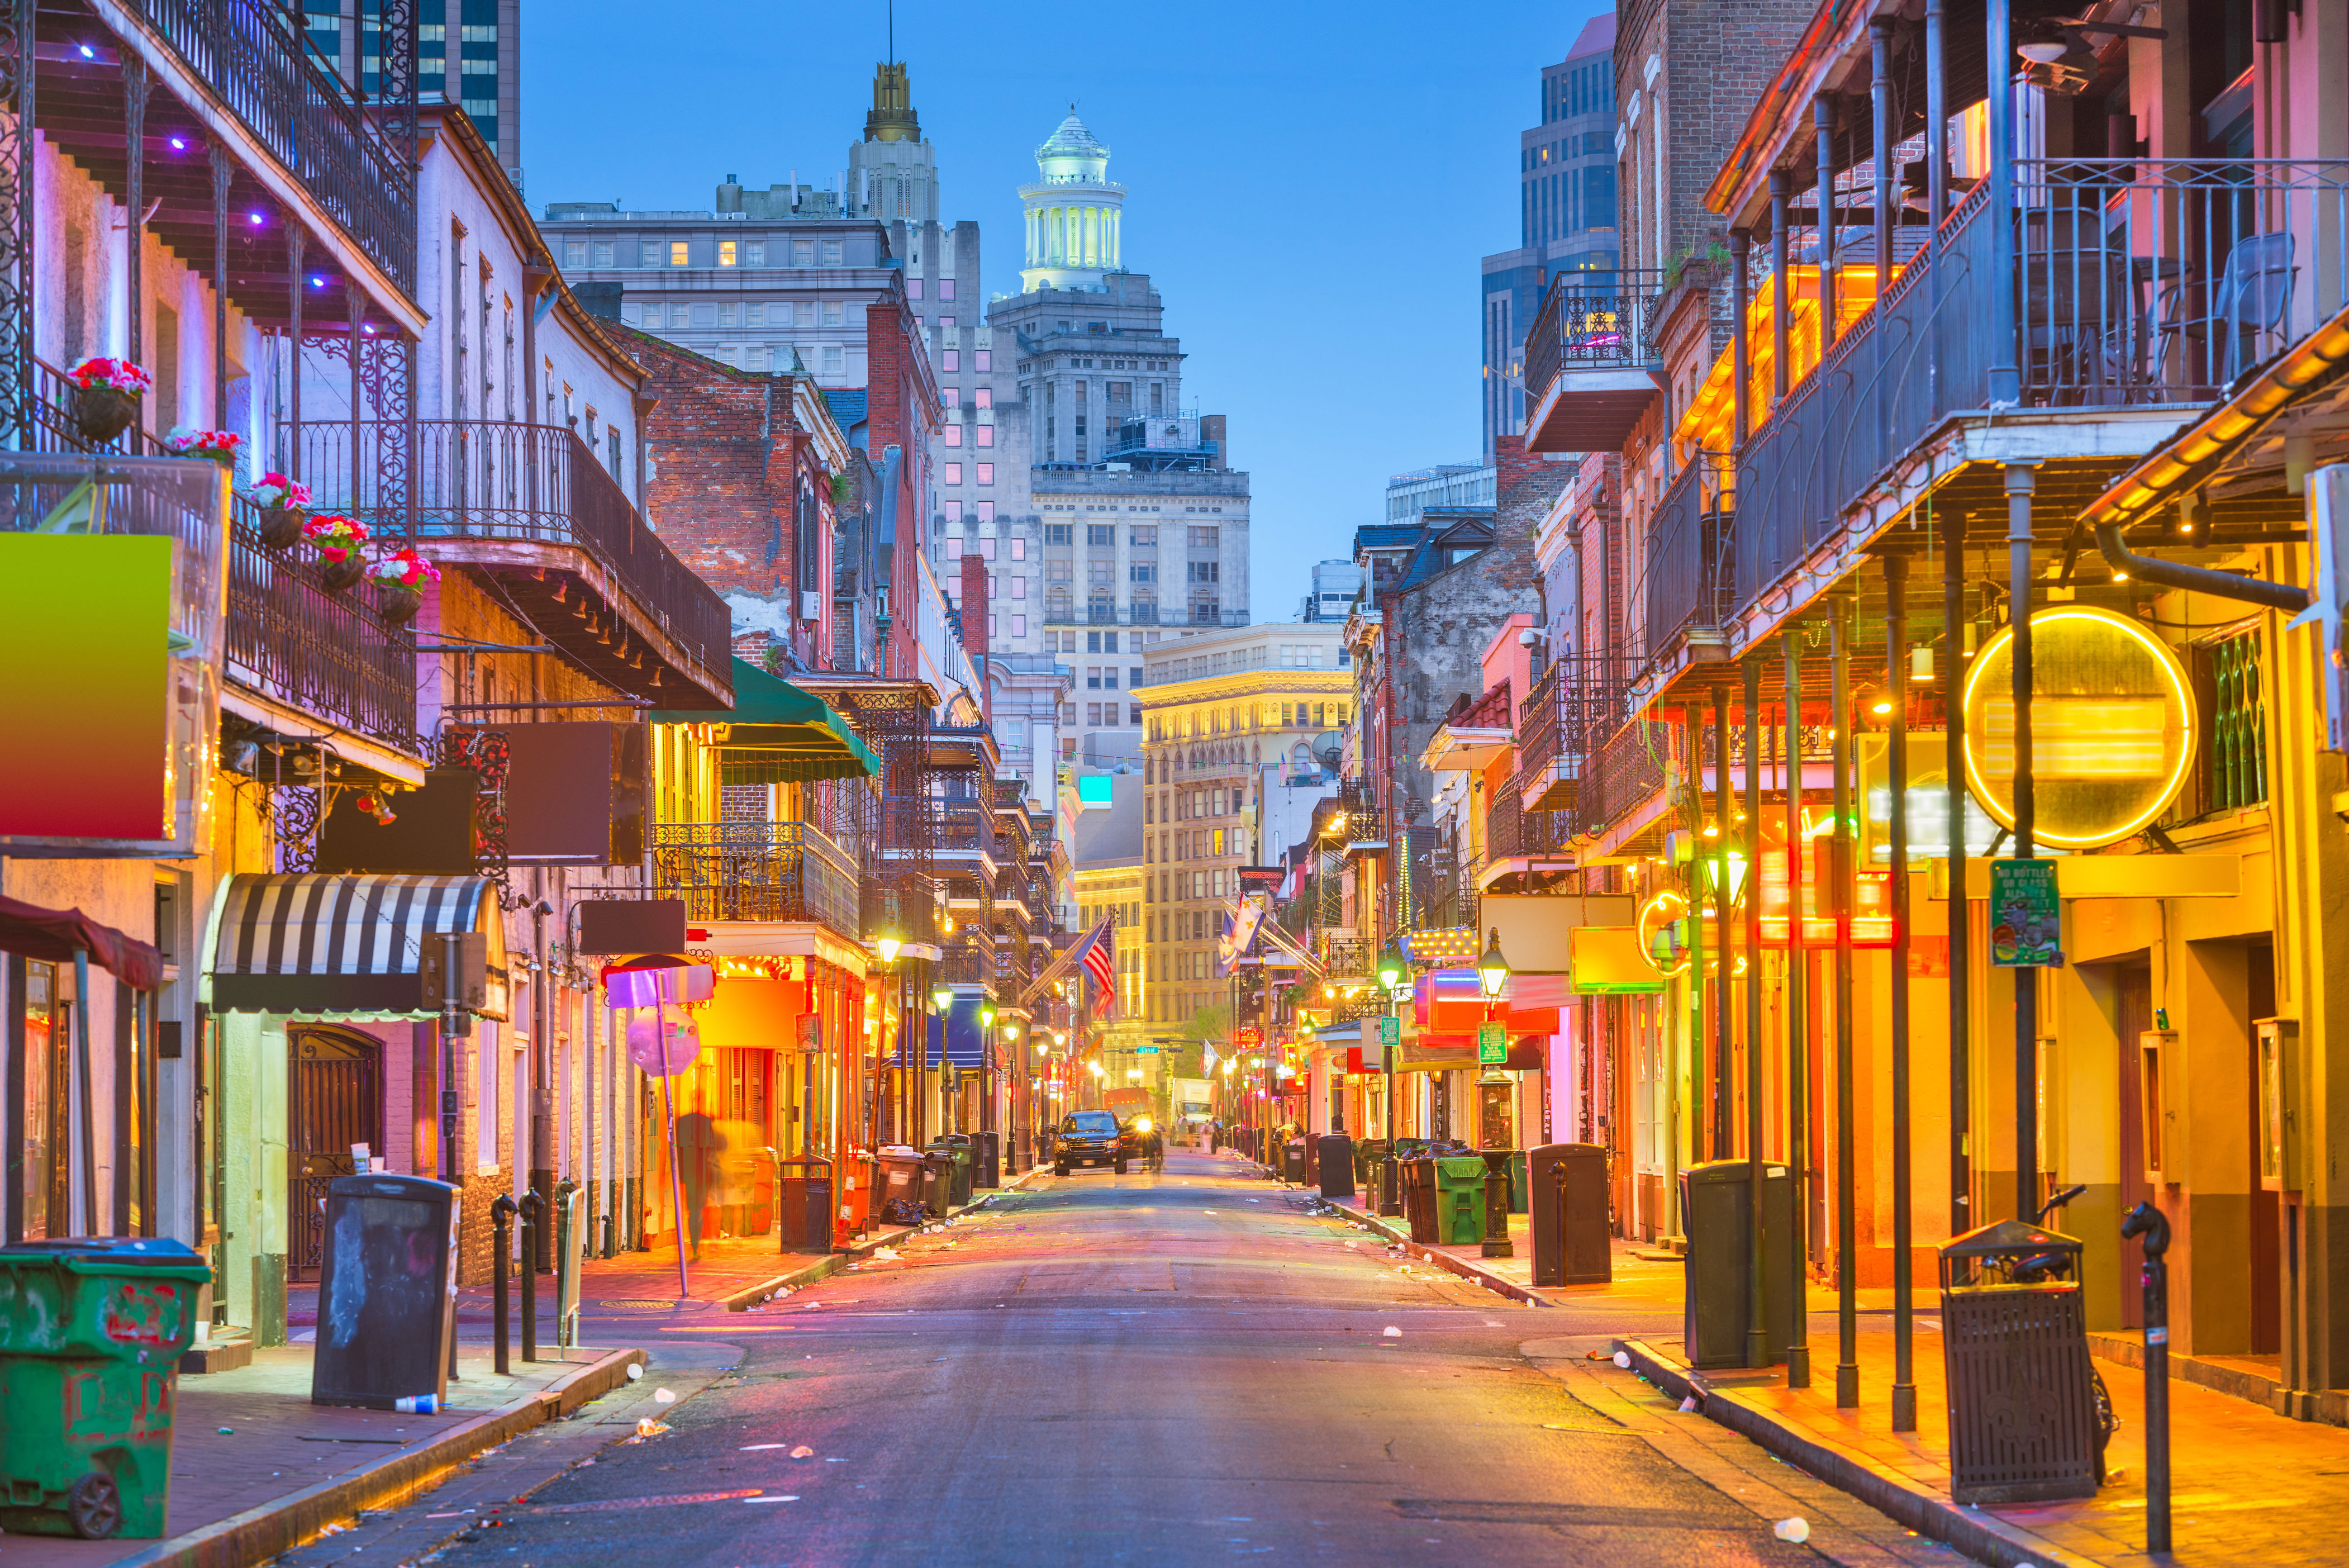 <p>From the French Quarter in New Orleans to the towering Gateway Arch in <a href="https://www.cntraveler.com/story/guide-to-st-louis?mbid=synd_msn_rss&utm_source=msn&utm_medium=syndication">St. Louis</a>, this <em>American Heritage</em> cruise lives up to its name. Inaugurated in 2015 and totally redecorated in 2022, the 84-cabin <em>American Heritage</em> is the perfect vessel for this interesting itinerary, its design reminiscent of the days when steamboat paddlewheelers plied the Mississippi in the 1800s.</p> <p>The 12-day voyage departs from New Orleans on July 2. Ports of call along the way include Baton Rouge in Louisiana; Natchez and Vicksburg in Mississippi; Memphis in Tennessee; and Paducah in <a href="https://www.cntraveler.com/story/how-to-sip-through-lesser-known-kentucky-bourbon-trail?mbid=synd_msn_rss&utm_source=msn&utm_medium=syndication">Kentucky</a>. An onboard expert shares tales of the importance of steam-driven paddlewheels in establishing riverfront communities along the great Mississippi River.</p> <p>Step ashore in Natchez and enjoy a cold drink at the Under-the-Hill-Saloon, once one of the rowdiest establishments on the Mississippi River in the 1800s. Legend says that Mark Twain stopped here when he was just another riverman named Samuel Clemens.</p> <div class="callout"><p><a href="https://cna.st/affiliate-link/kDoCfXgWoowzcCrft4cjg269nX2GW9jBF5NB1VqCsMP9kpfnaLLc68P21ZW2fkGz2h7P4VCGeN2YDfSdmwYSA8UqND5Psk12xTtRasuKtNFYtGpBwjB2MngXtju1VCSJYWXYYspfqG9DwMNvyngzHrUEQwMmaXbP6Kwp2gLKCMTfsTPETgJmRhK1sHMDYxT5svveBoDCJMAGLVaZDeAbrMhJn7hdyLRDb" rel="sponsored" title="Book with American Cruise Lines">Book with American Cruise Lines</a></p> </div><p>Sign up to receive the latest news, expert tips, and inspiration on all things travel</p><a href="https://www.cntraveler.com/newsletter/the-daily?sourceCode=msnsend">Inspire Me</a>